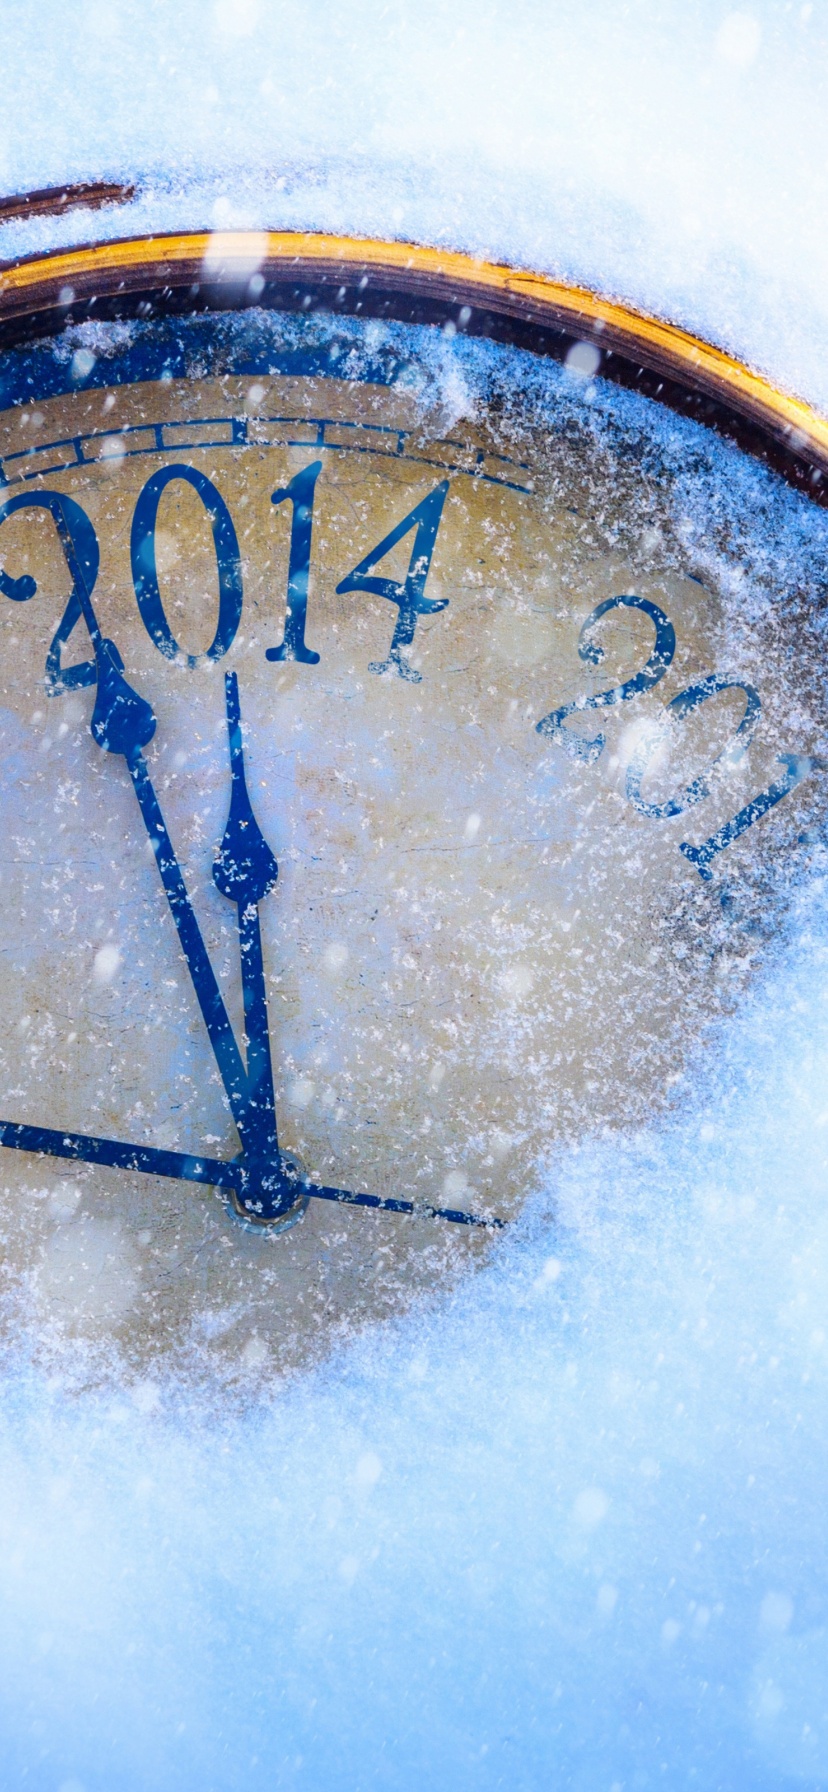 A Few Minutes To The New Year 2014